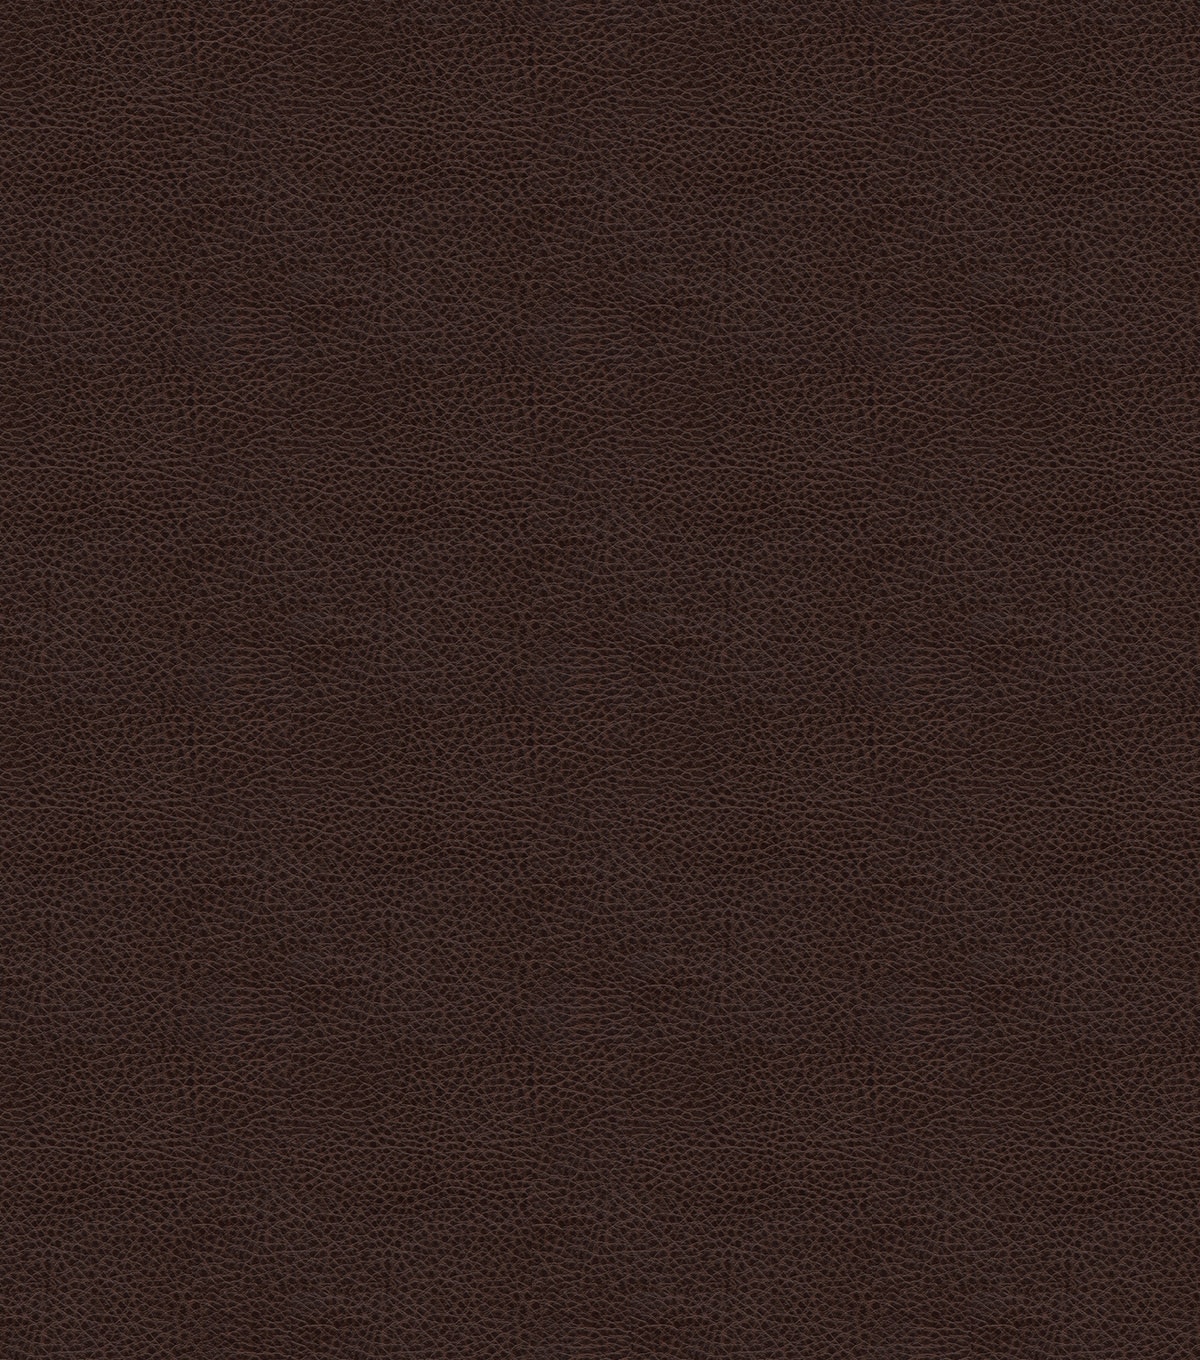 Baldwin Faux Leather Fabric Solids